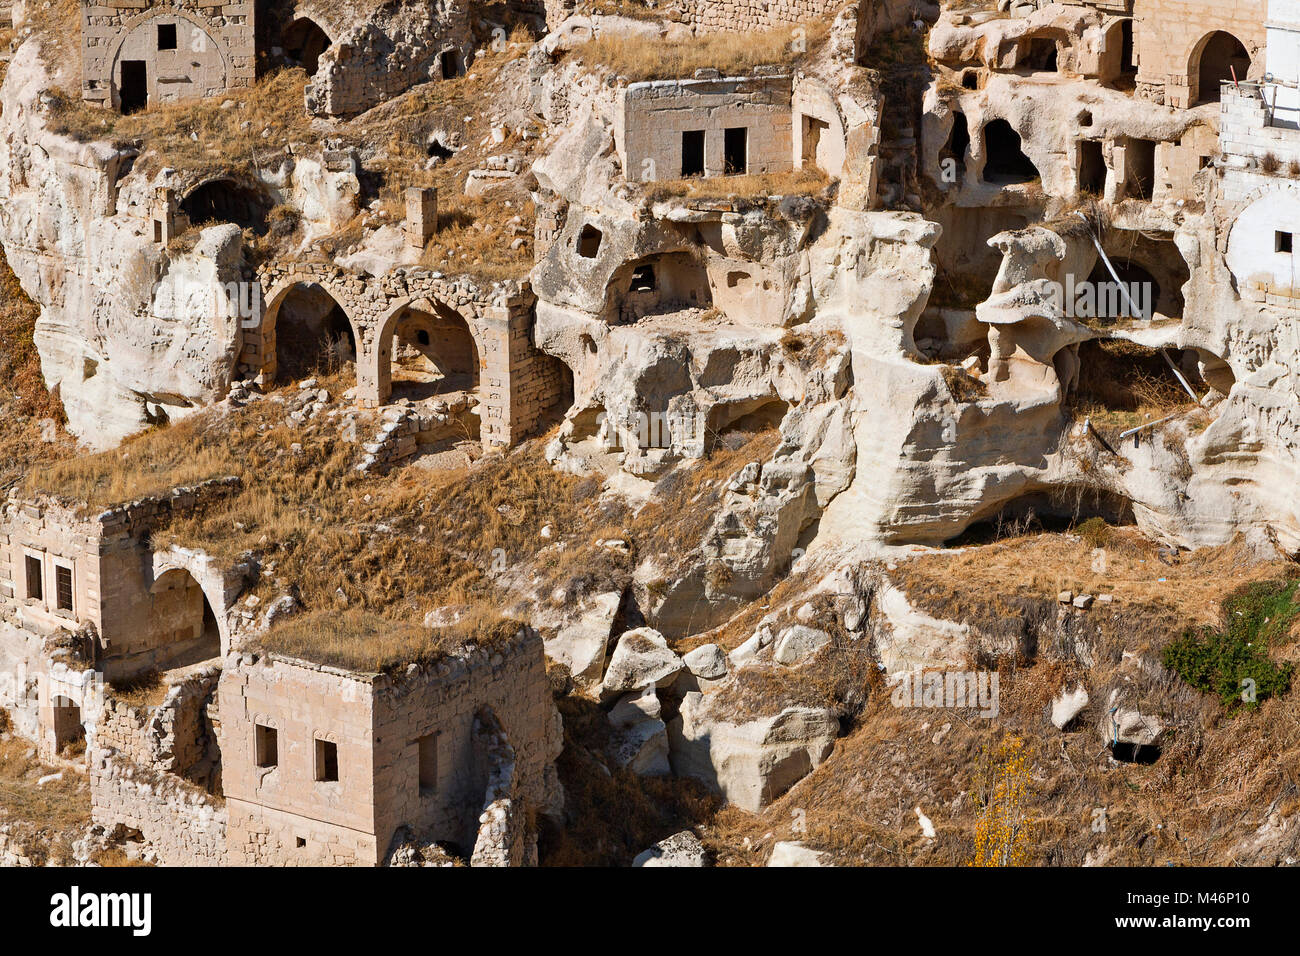 Abandoned old houses and cave dwellings in Cappadocia, Turkey. Stock Photo